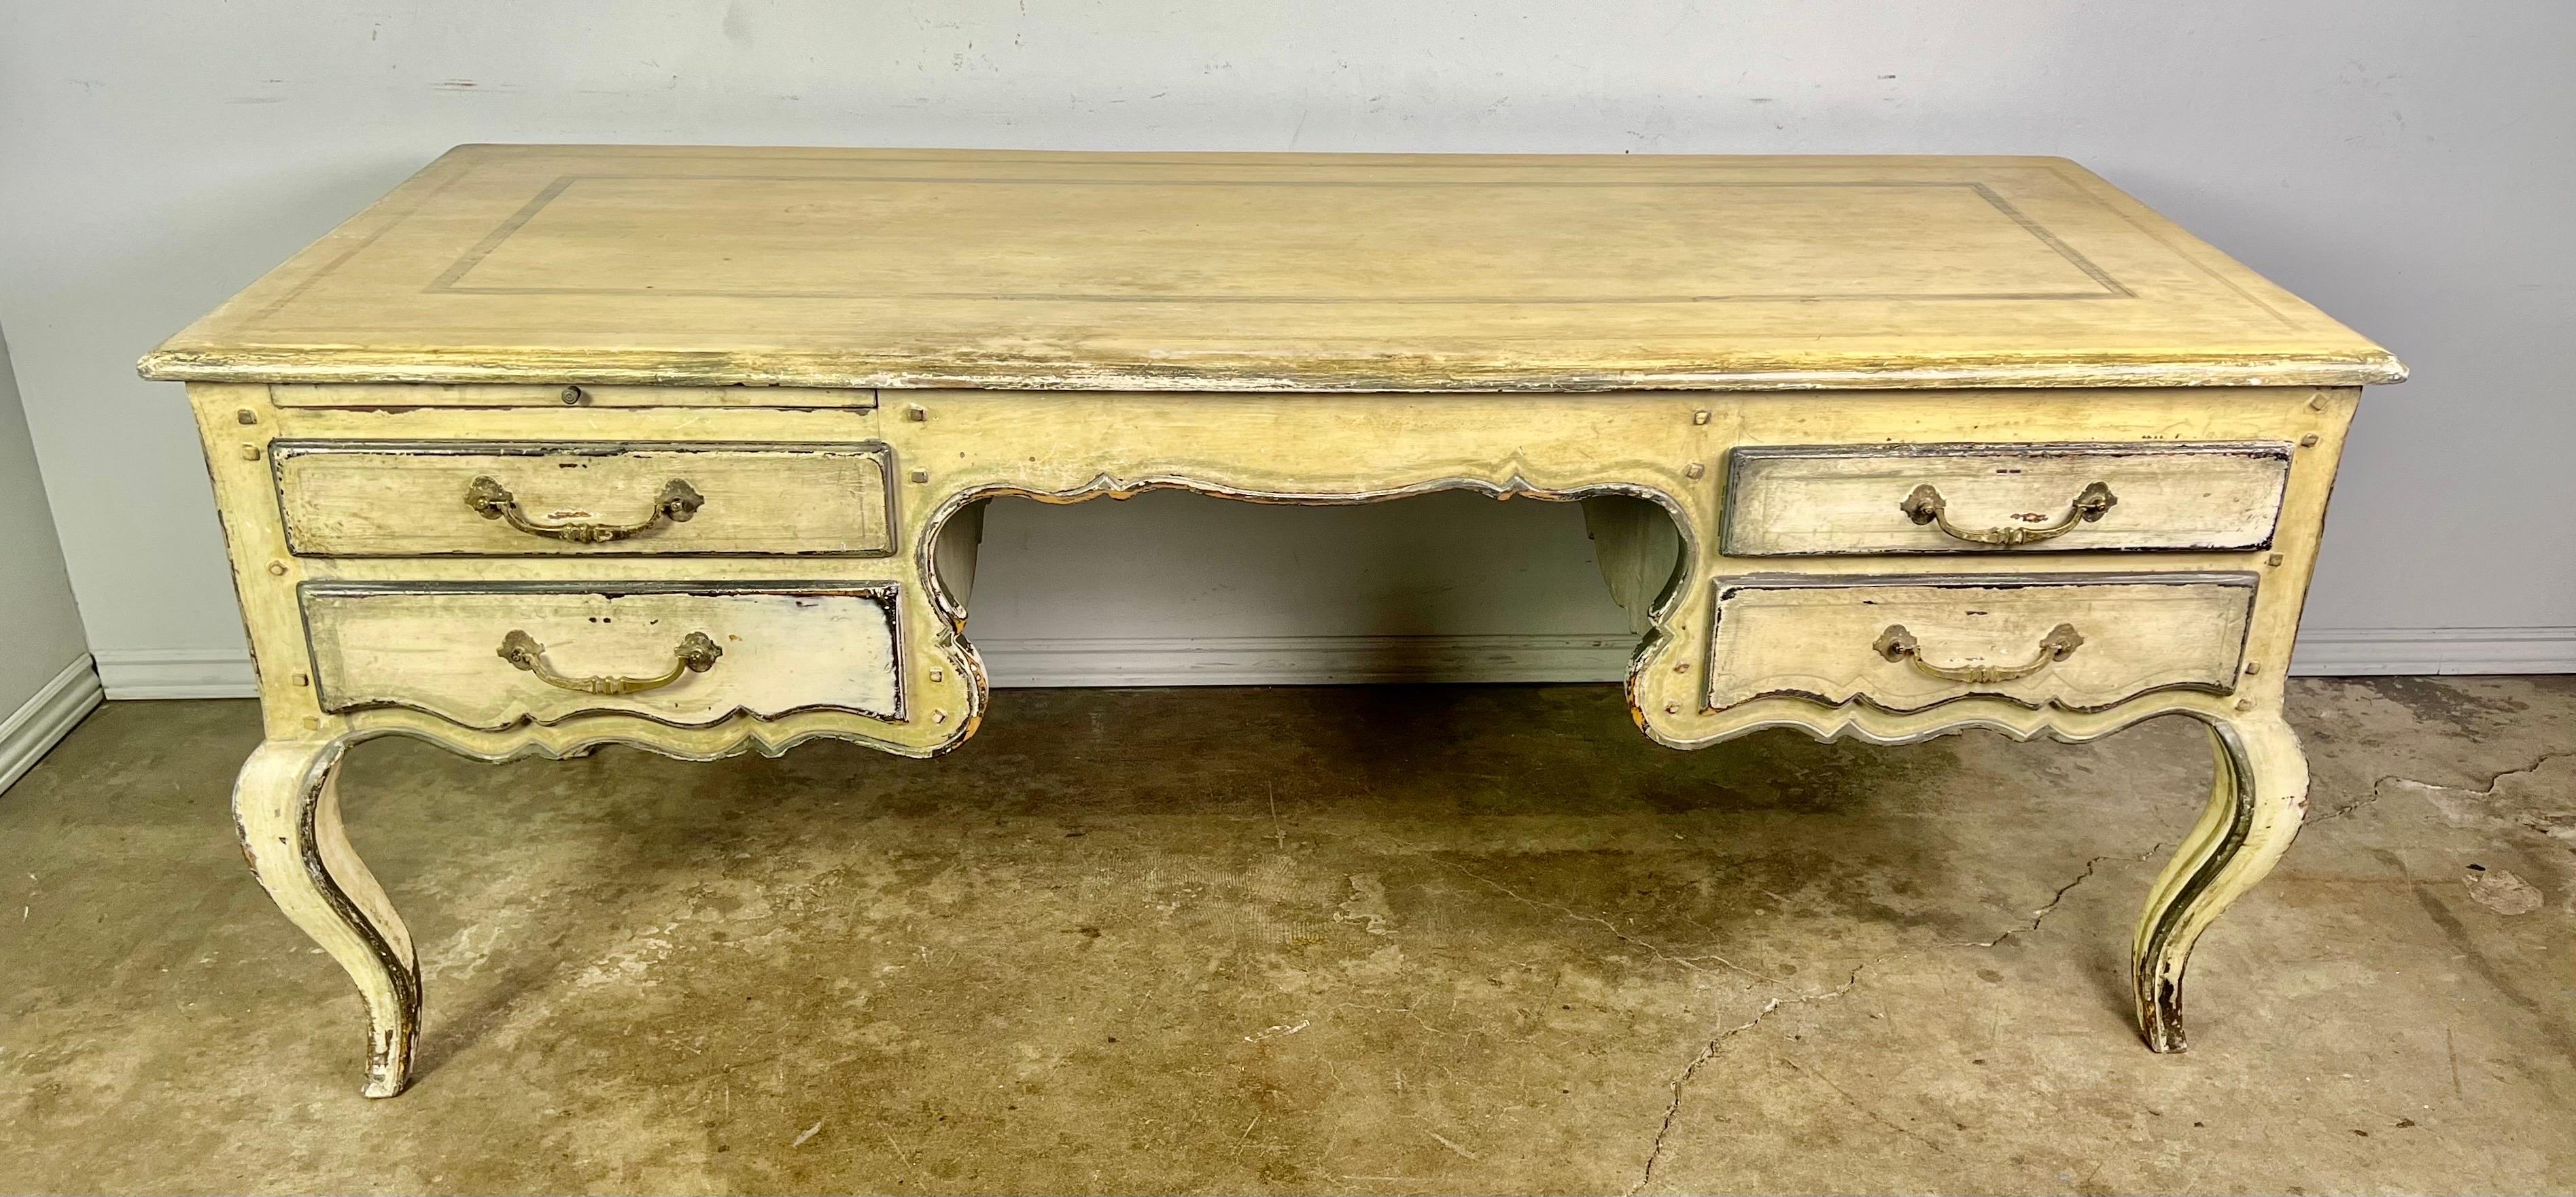 Early 20th century painted French Provincial style desk. The desk stands on four cabriole legs that end in rams head feet. The piece is beautifully painted in a worn. Faded finish. There are four functioning drawers and a slide out shelf on one side